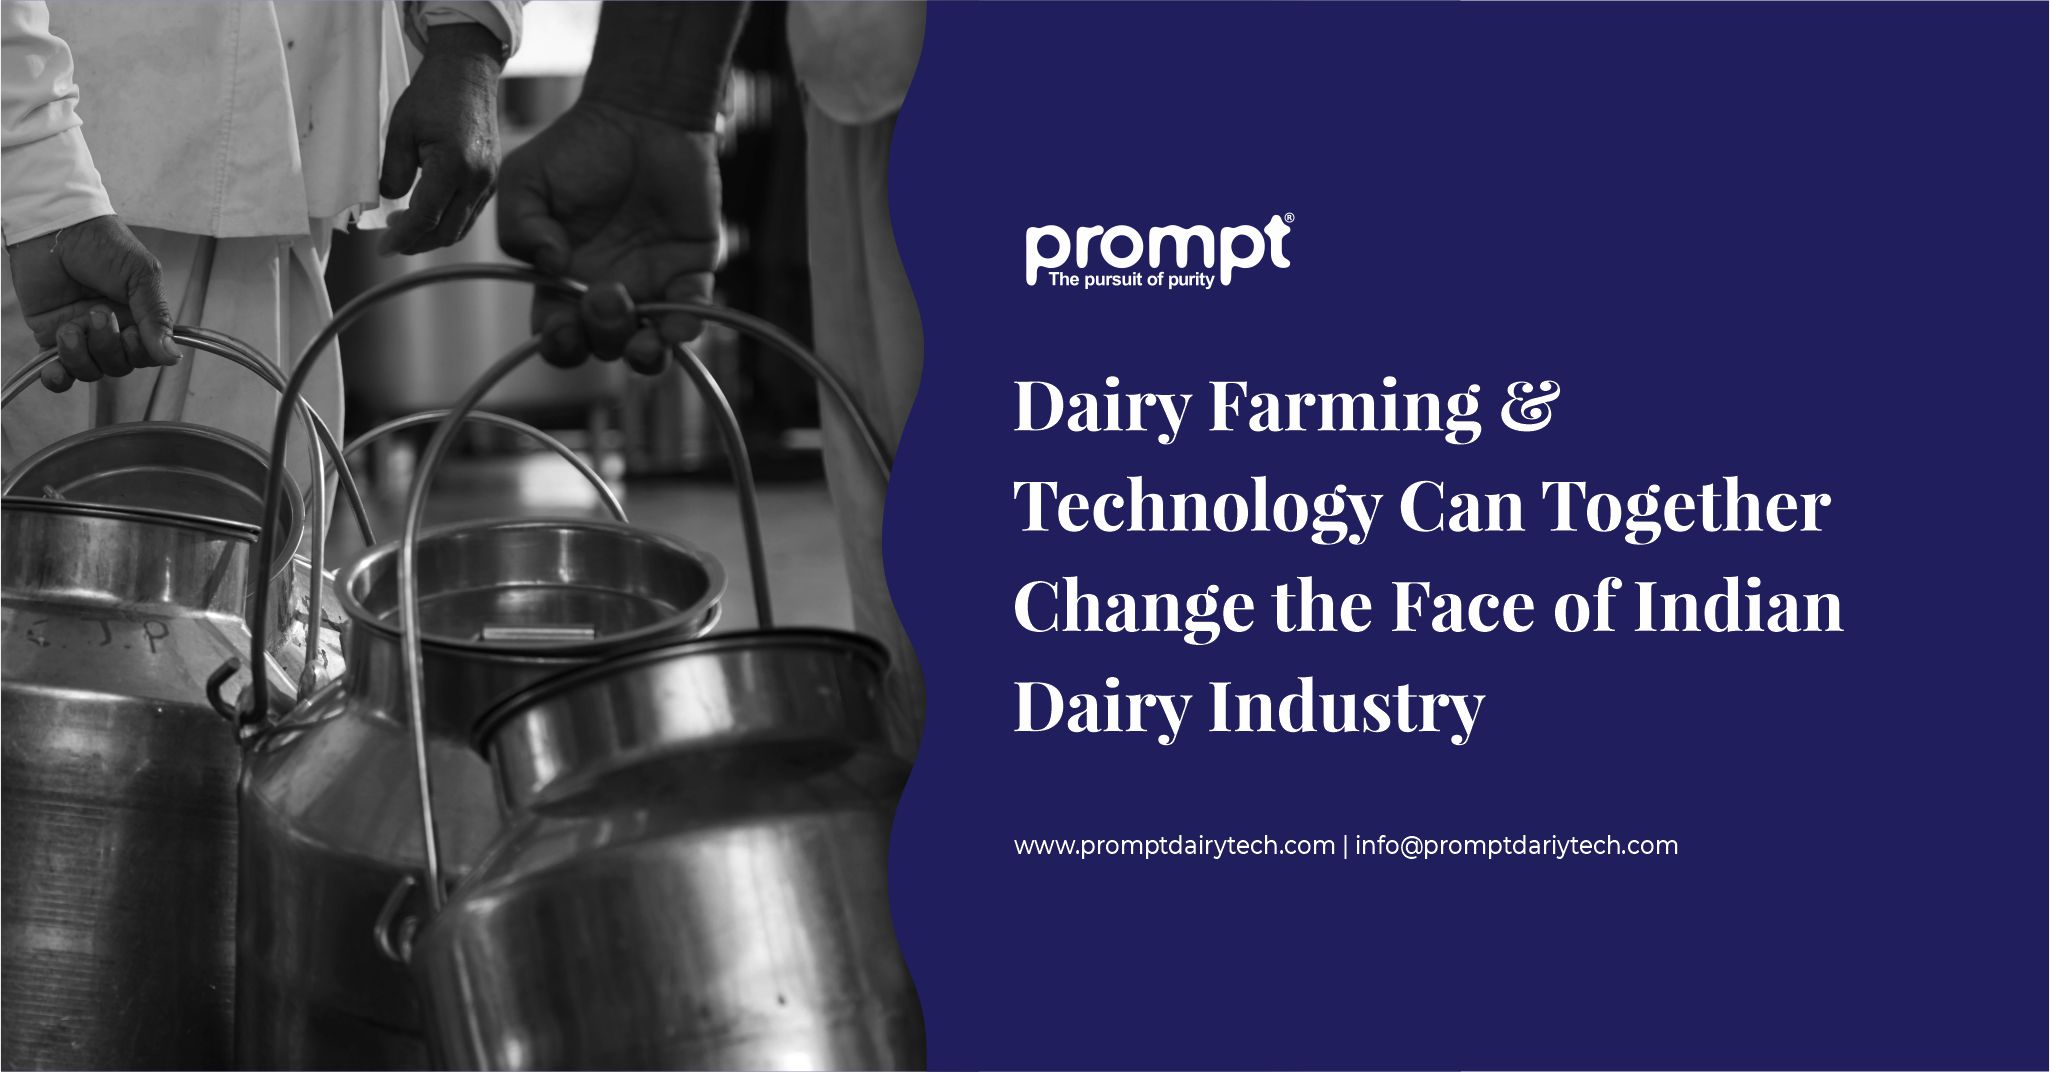 Dairy Farming & Technology Can Together Change the Face of Indian Dairy Industry